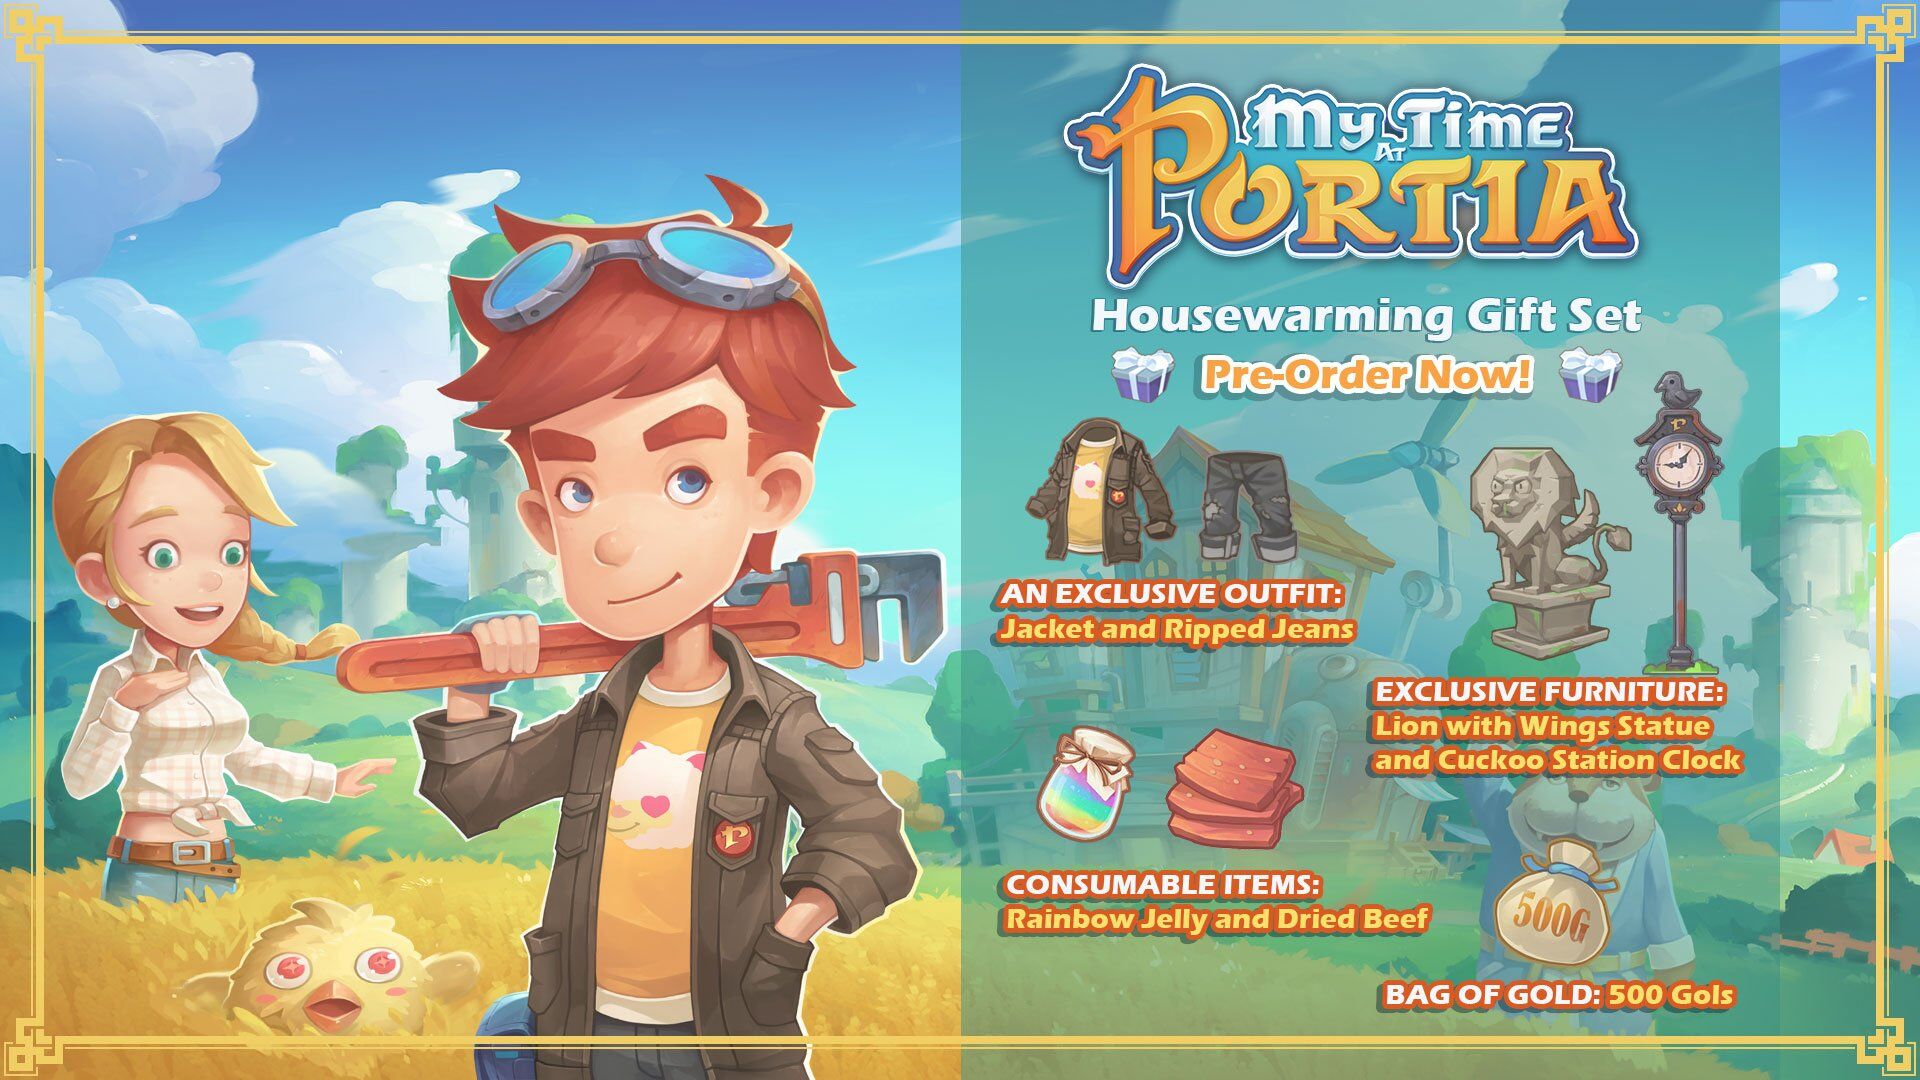 https://static.wikia.nocookie.net/mytimeatportia/images/3/3f/Console_Preorder_Promo_Image.jpg/revision/latest/scale-to-width-down/1920?cb=20190416055030